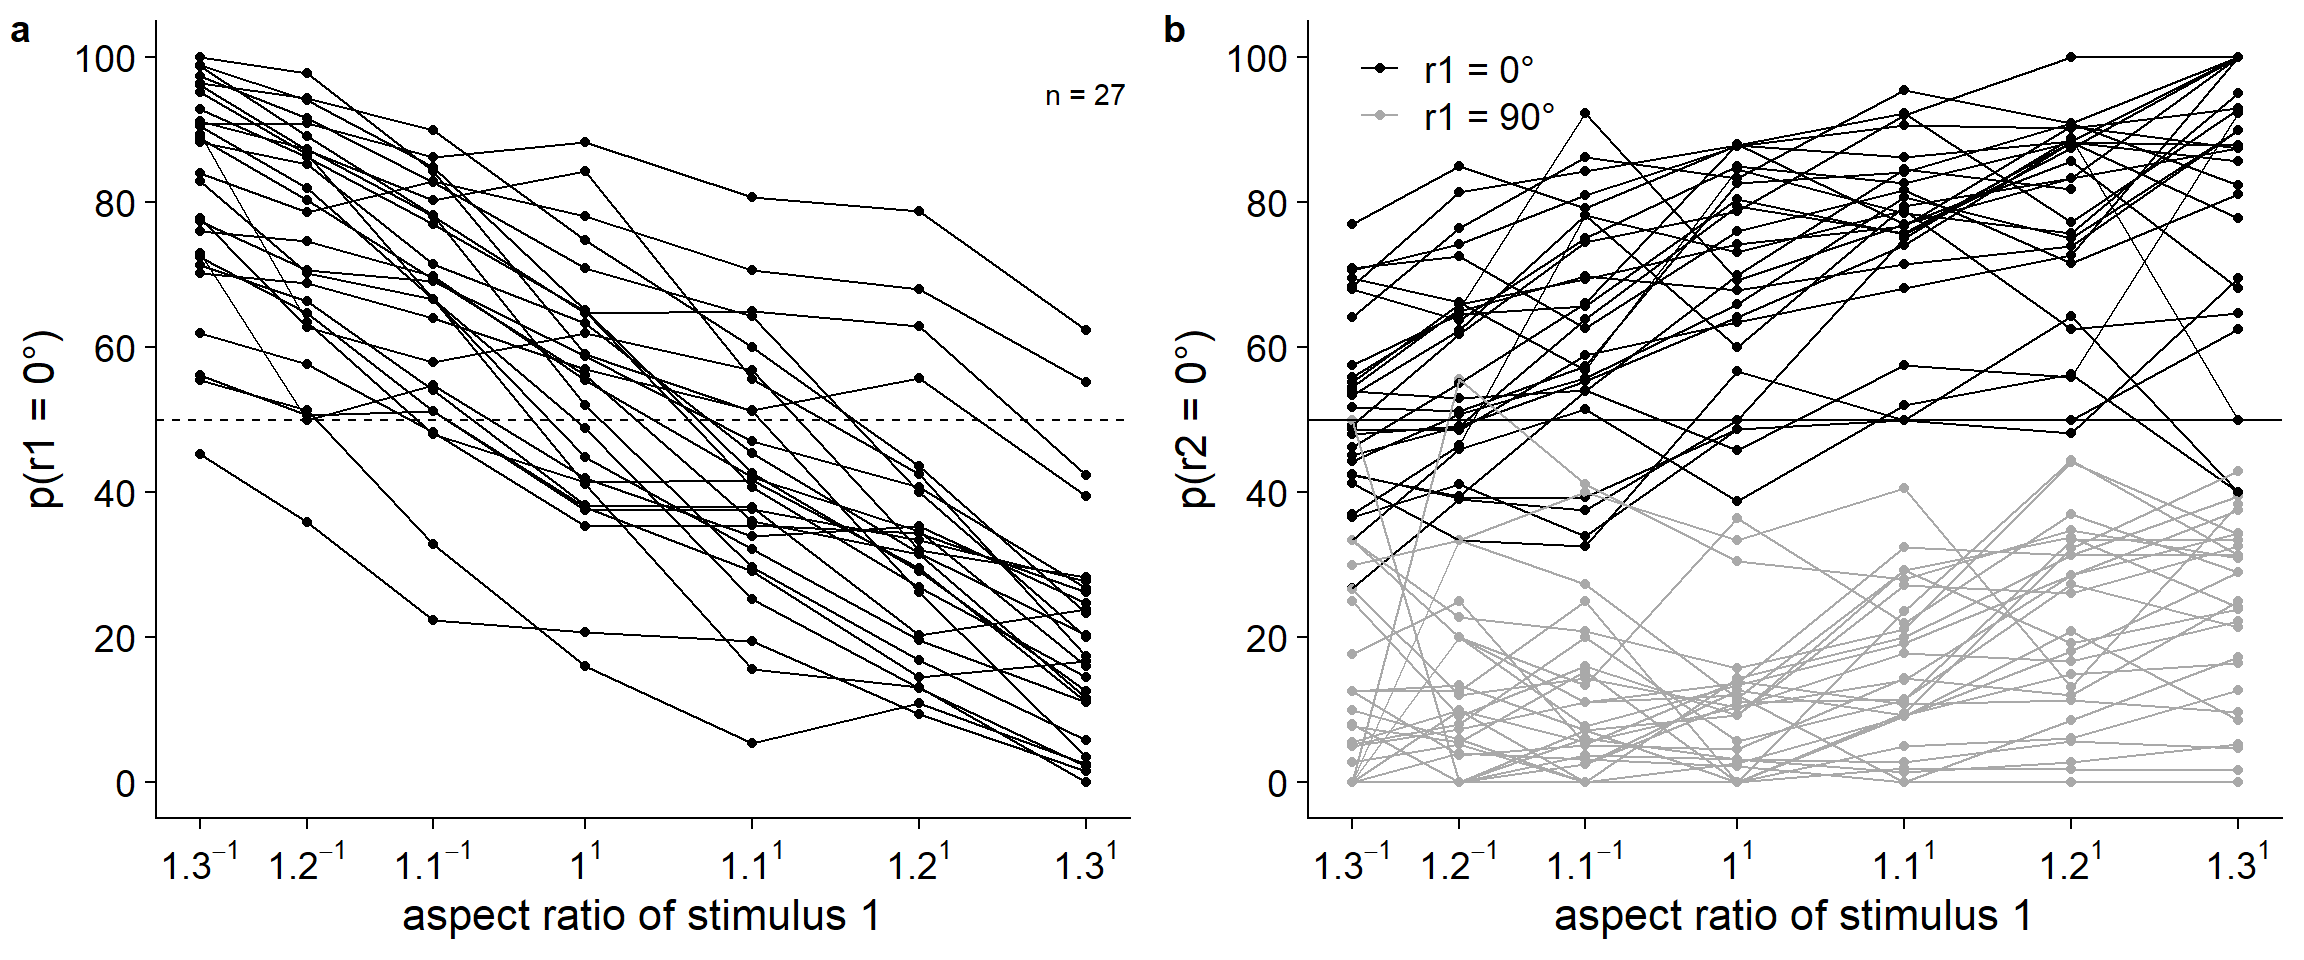 (a) Mean individual responses to the first stimulus dependent on aspect ratio (probability). The probability of responding 0° to the first stimulus decreases with aspect ratio (d0/d90). The value of aspect ratio increases with increasing distance in the 0°-orientation, leading to more 90° responses. (b) Mean individual responses to the second stimulus dependent on aspect ratio (probability). The probability of responding 0° to the second stimulus increases with aspect ratio (d0/d90; i.e., adaptation effect), and increases when the first stimulus was perceived as 0° rather than 90° (i.e., hysteresis effect).